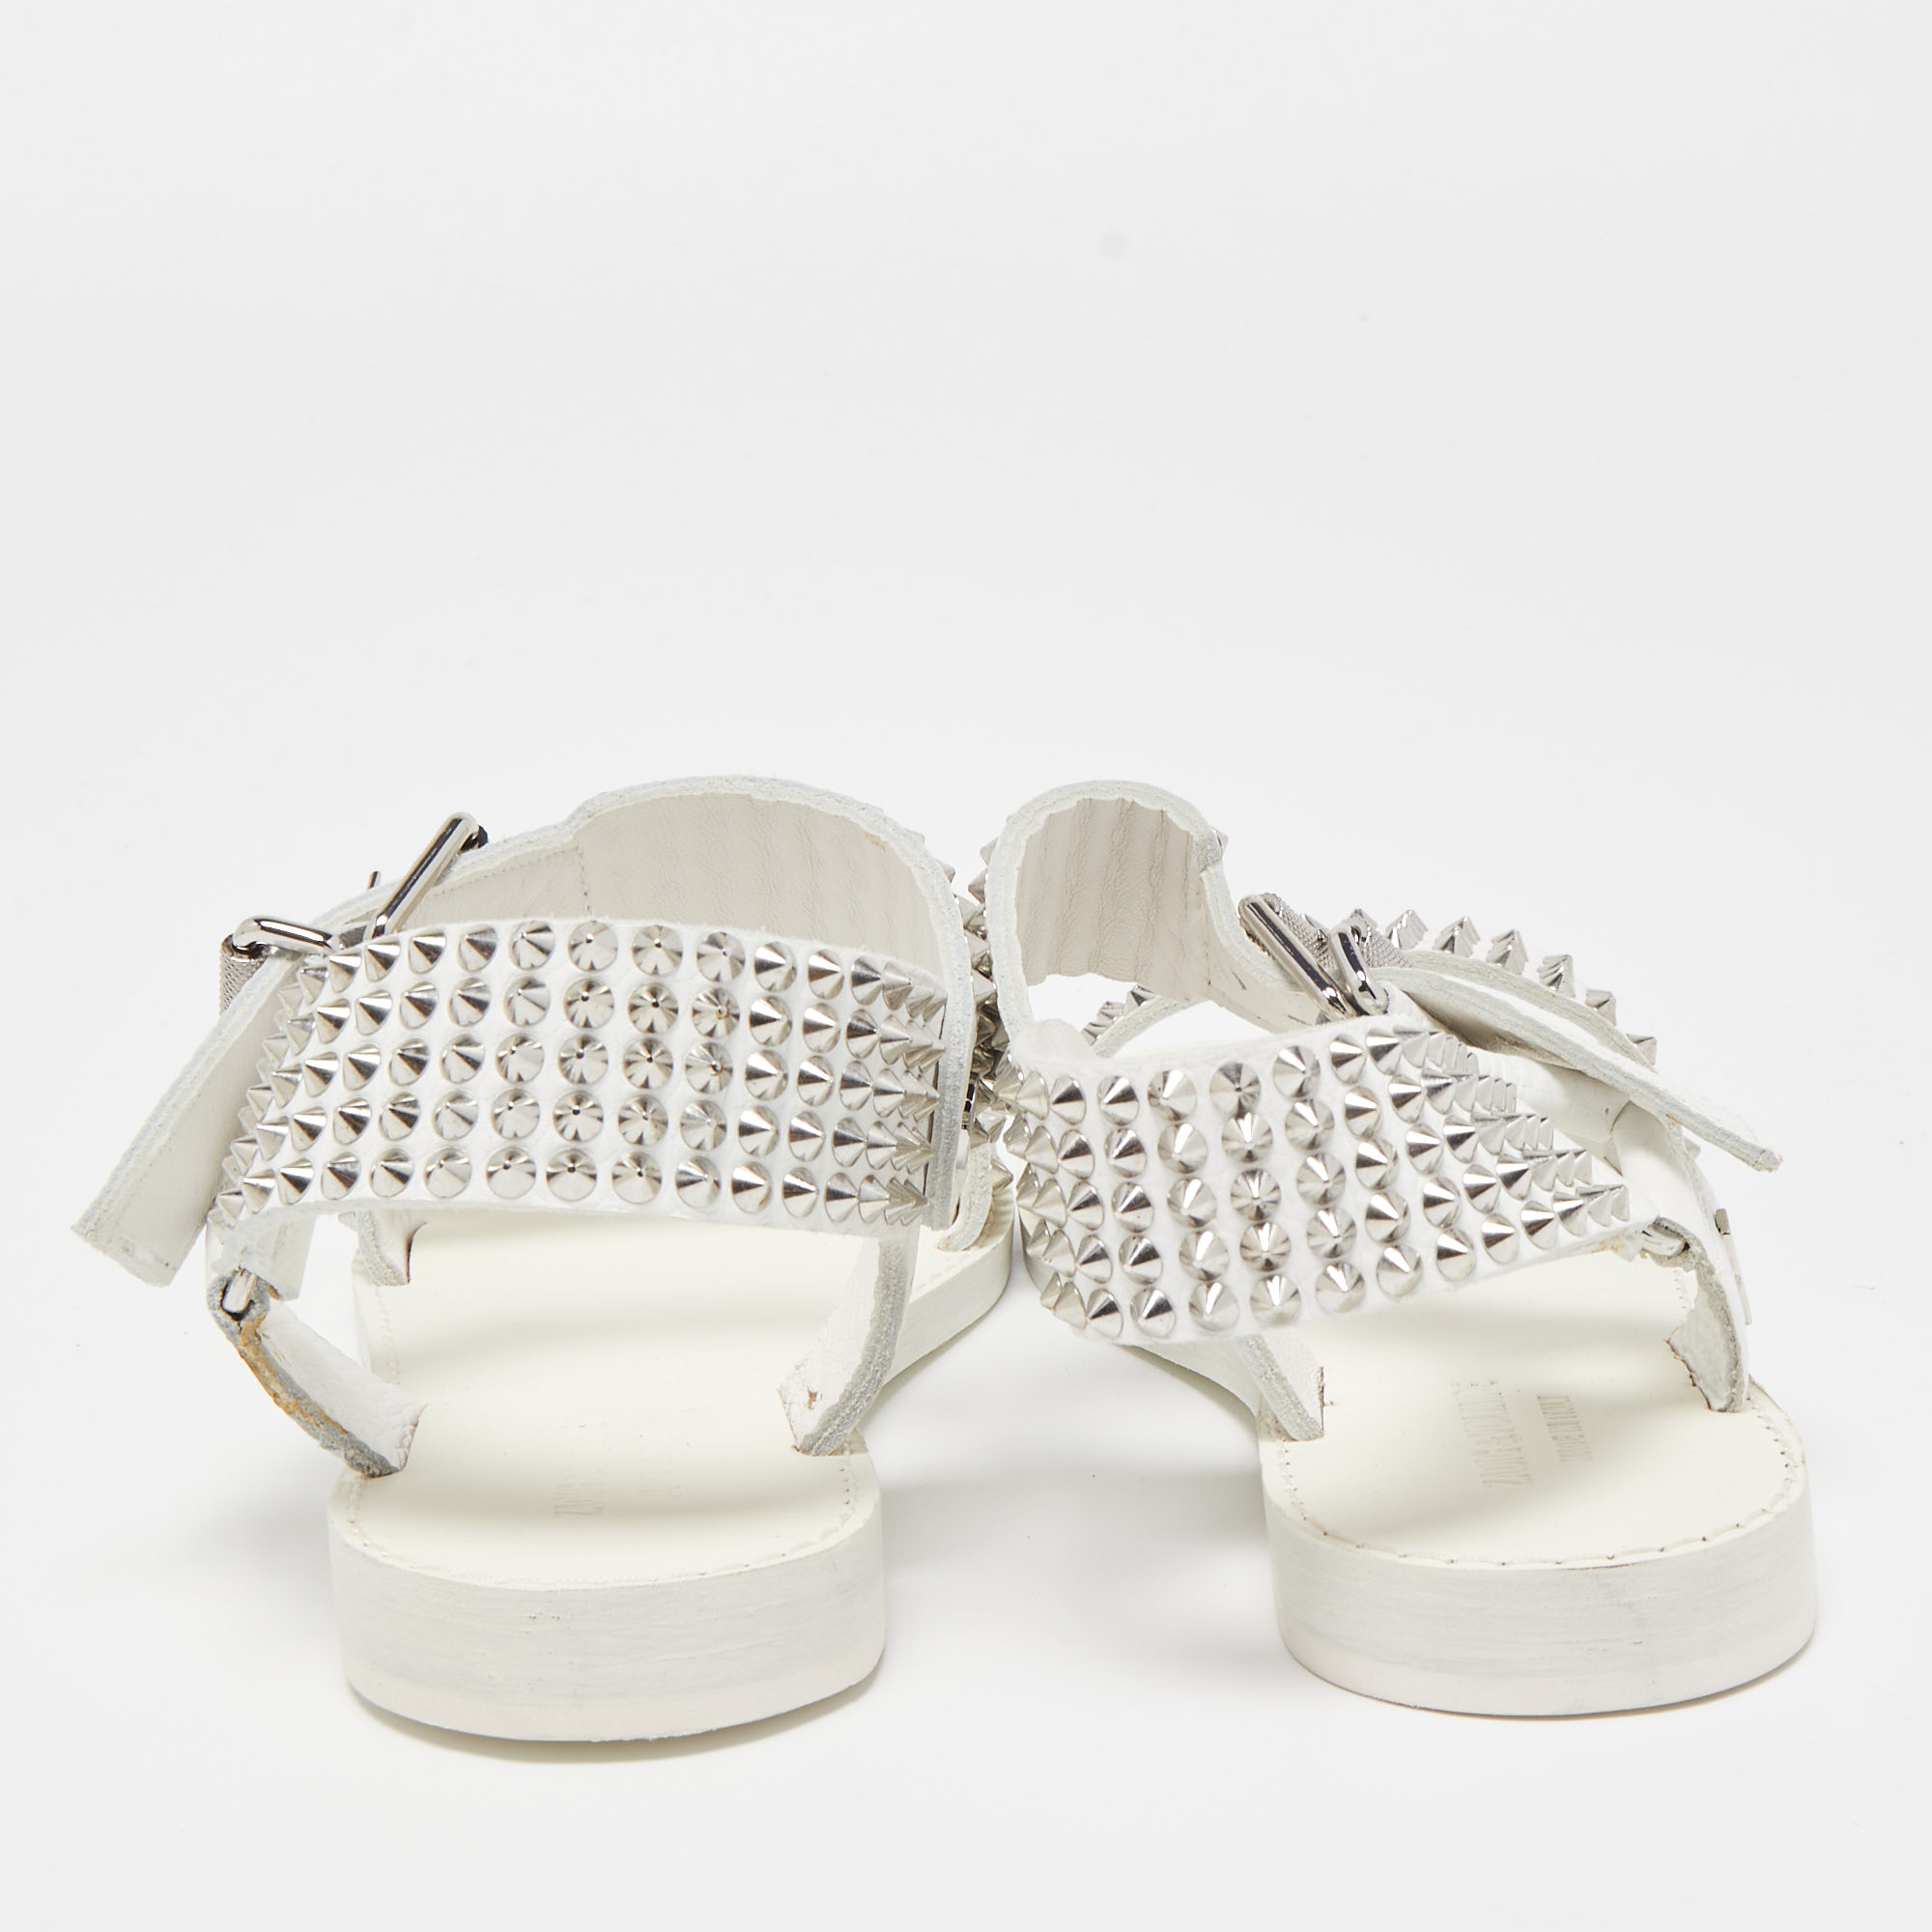 Zadig & Voltaire White Leather Ankle Strap Spiked Sandals Size 36